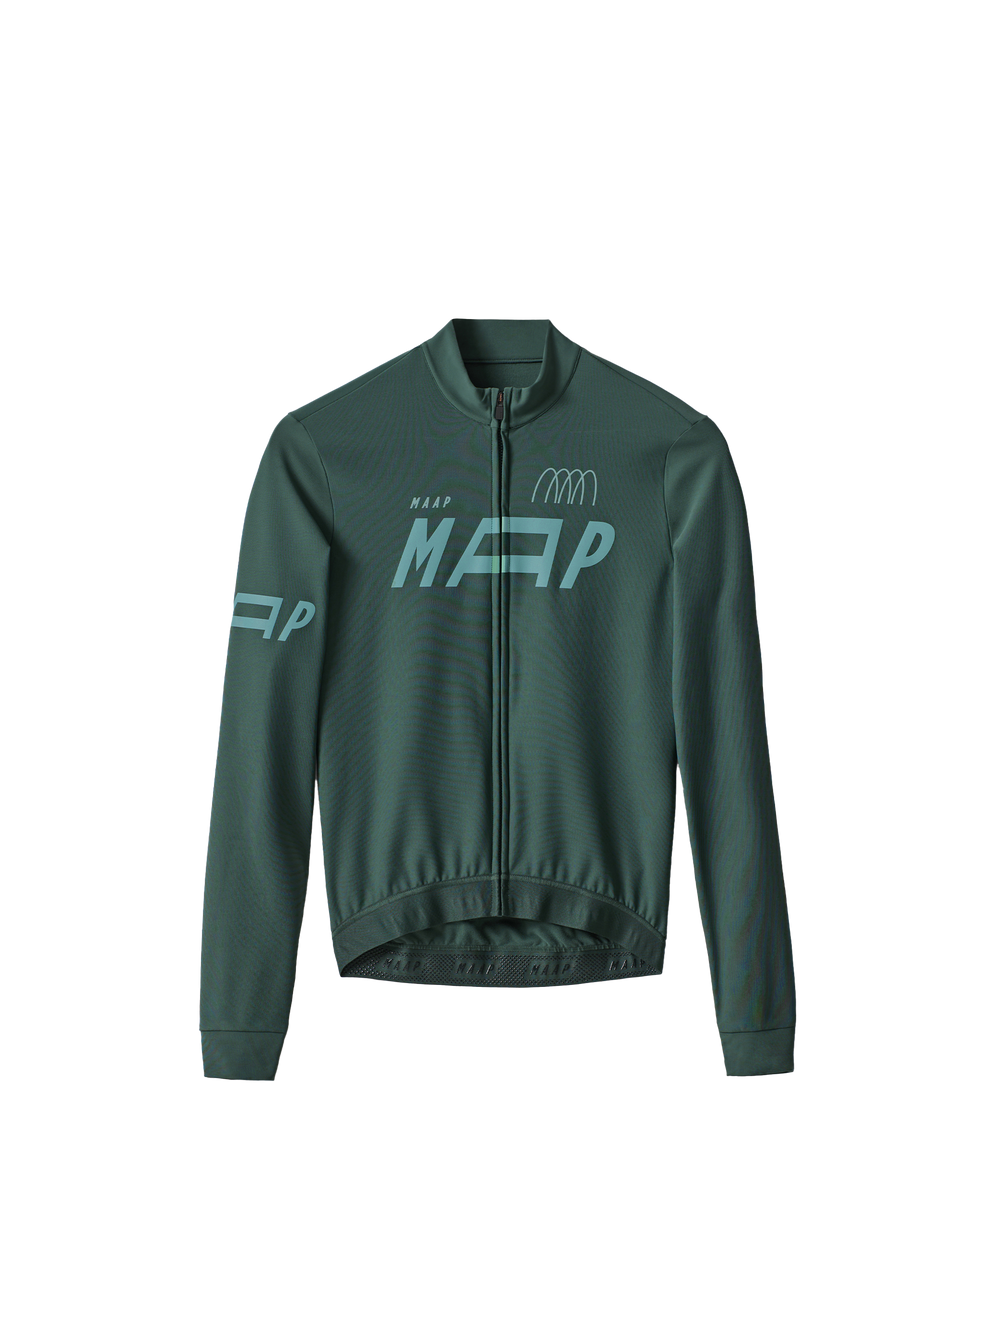 Product Image for Adapt Thermal LS Jersey